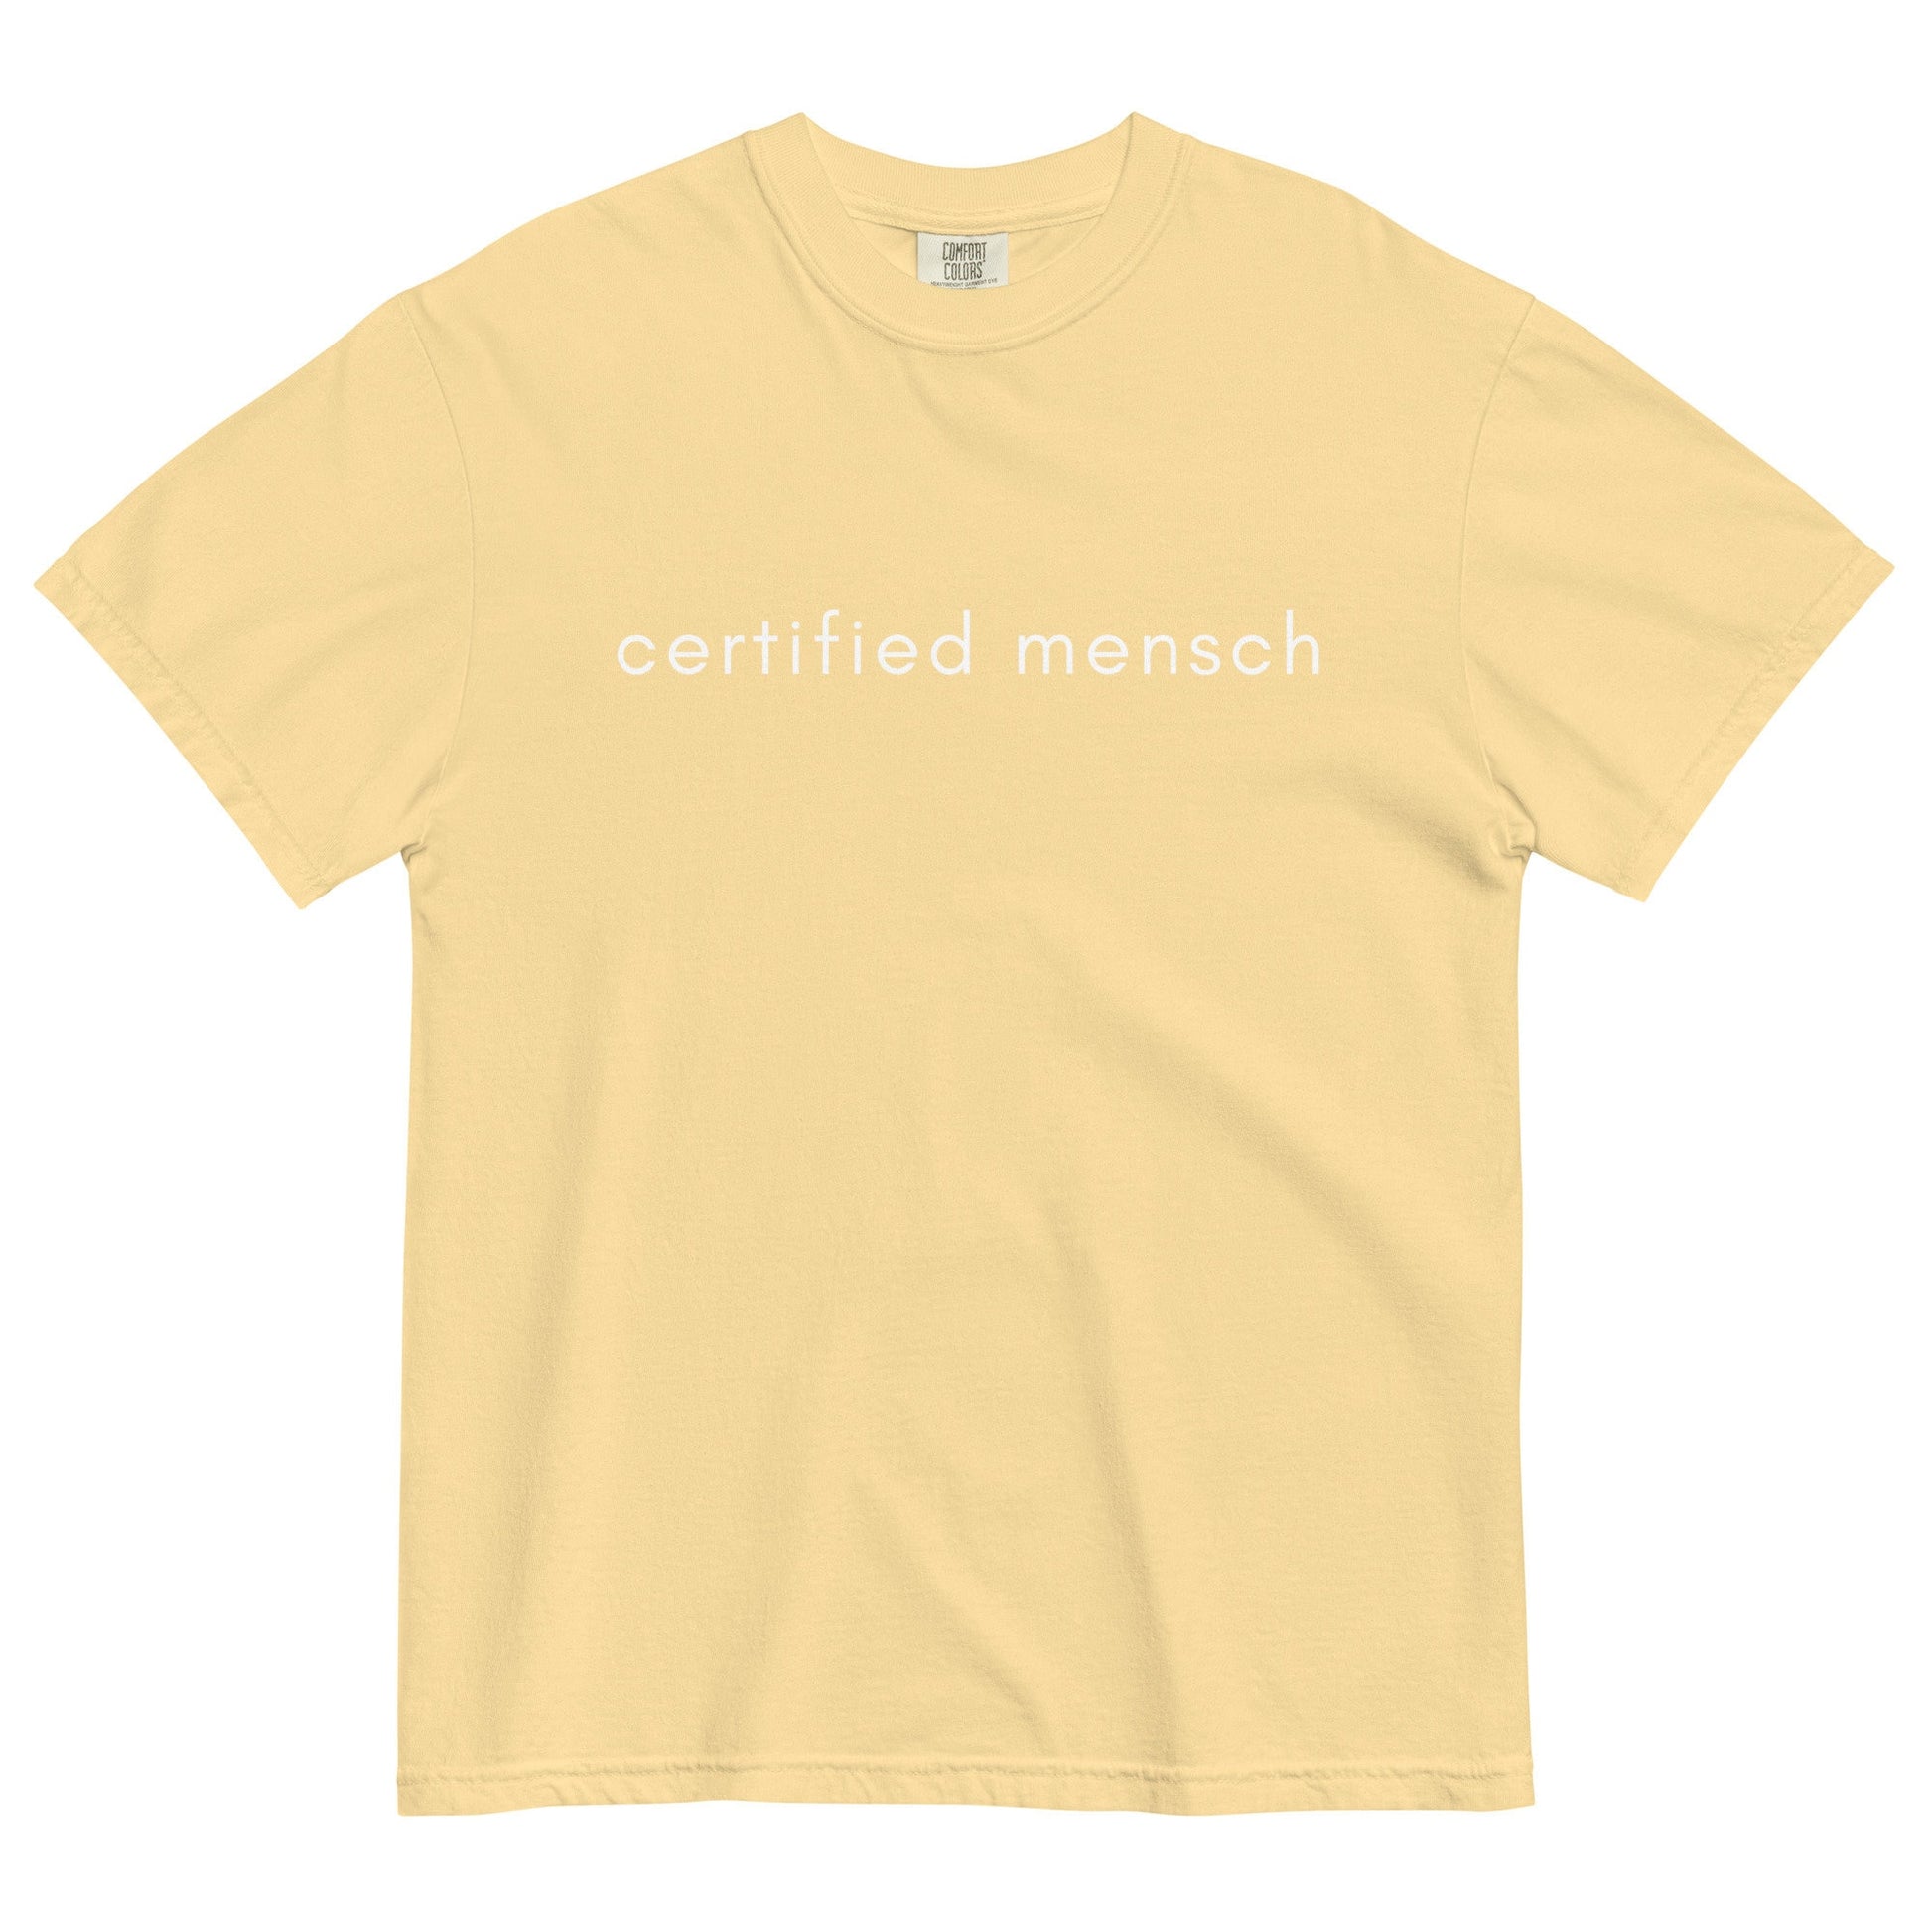 Mensch T Shirt - Funny Jewish Gift - GOATED - Minimalist Cotton Tee - Multiple Colors